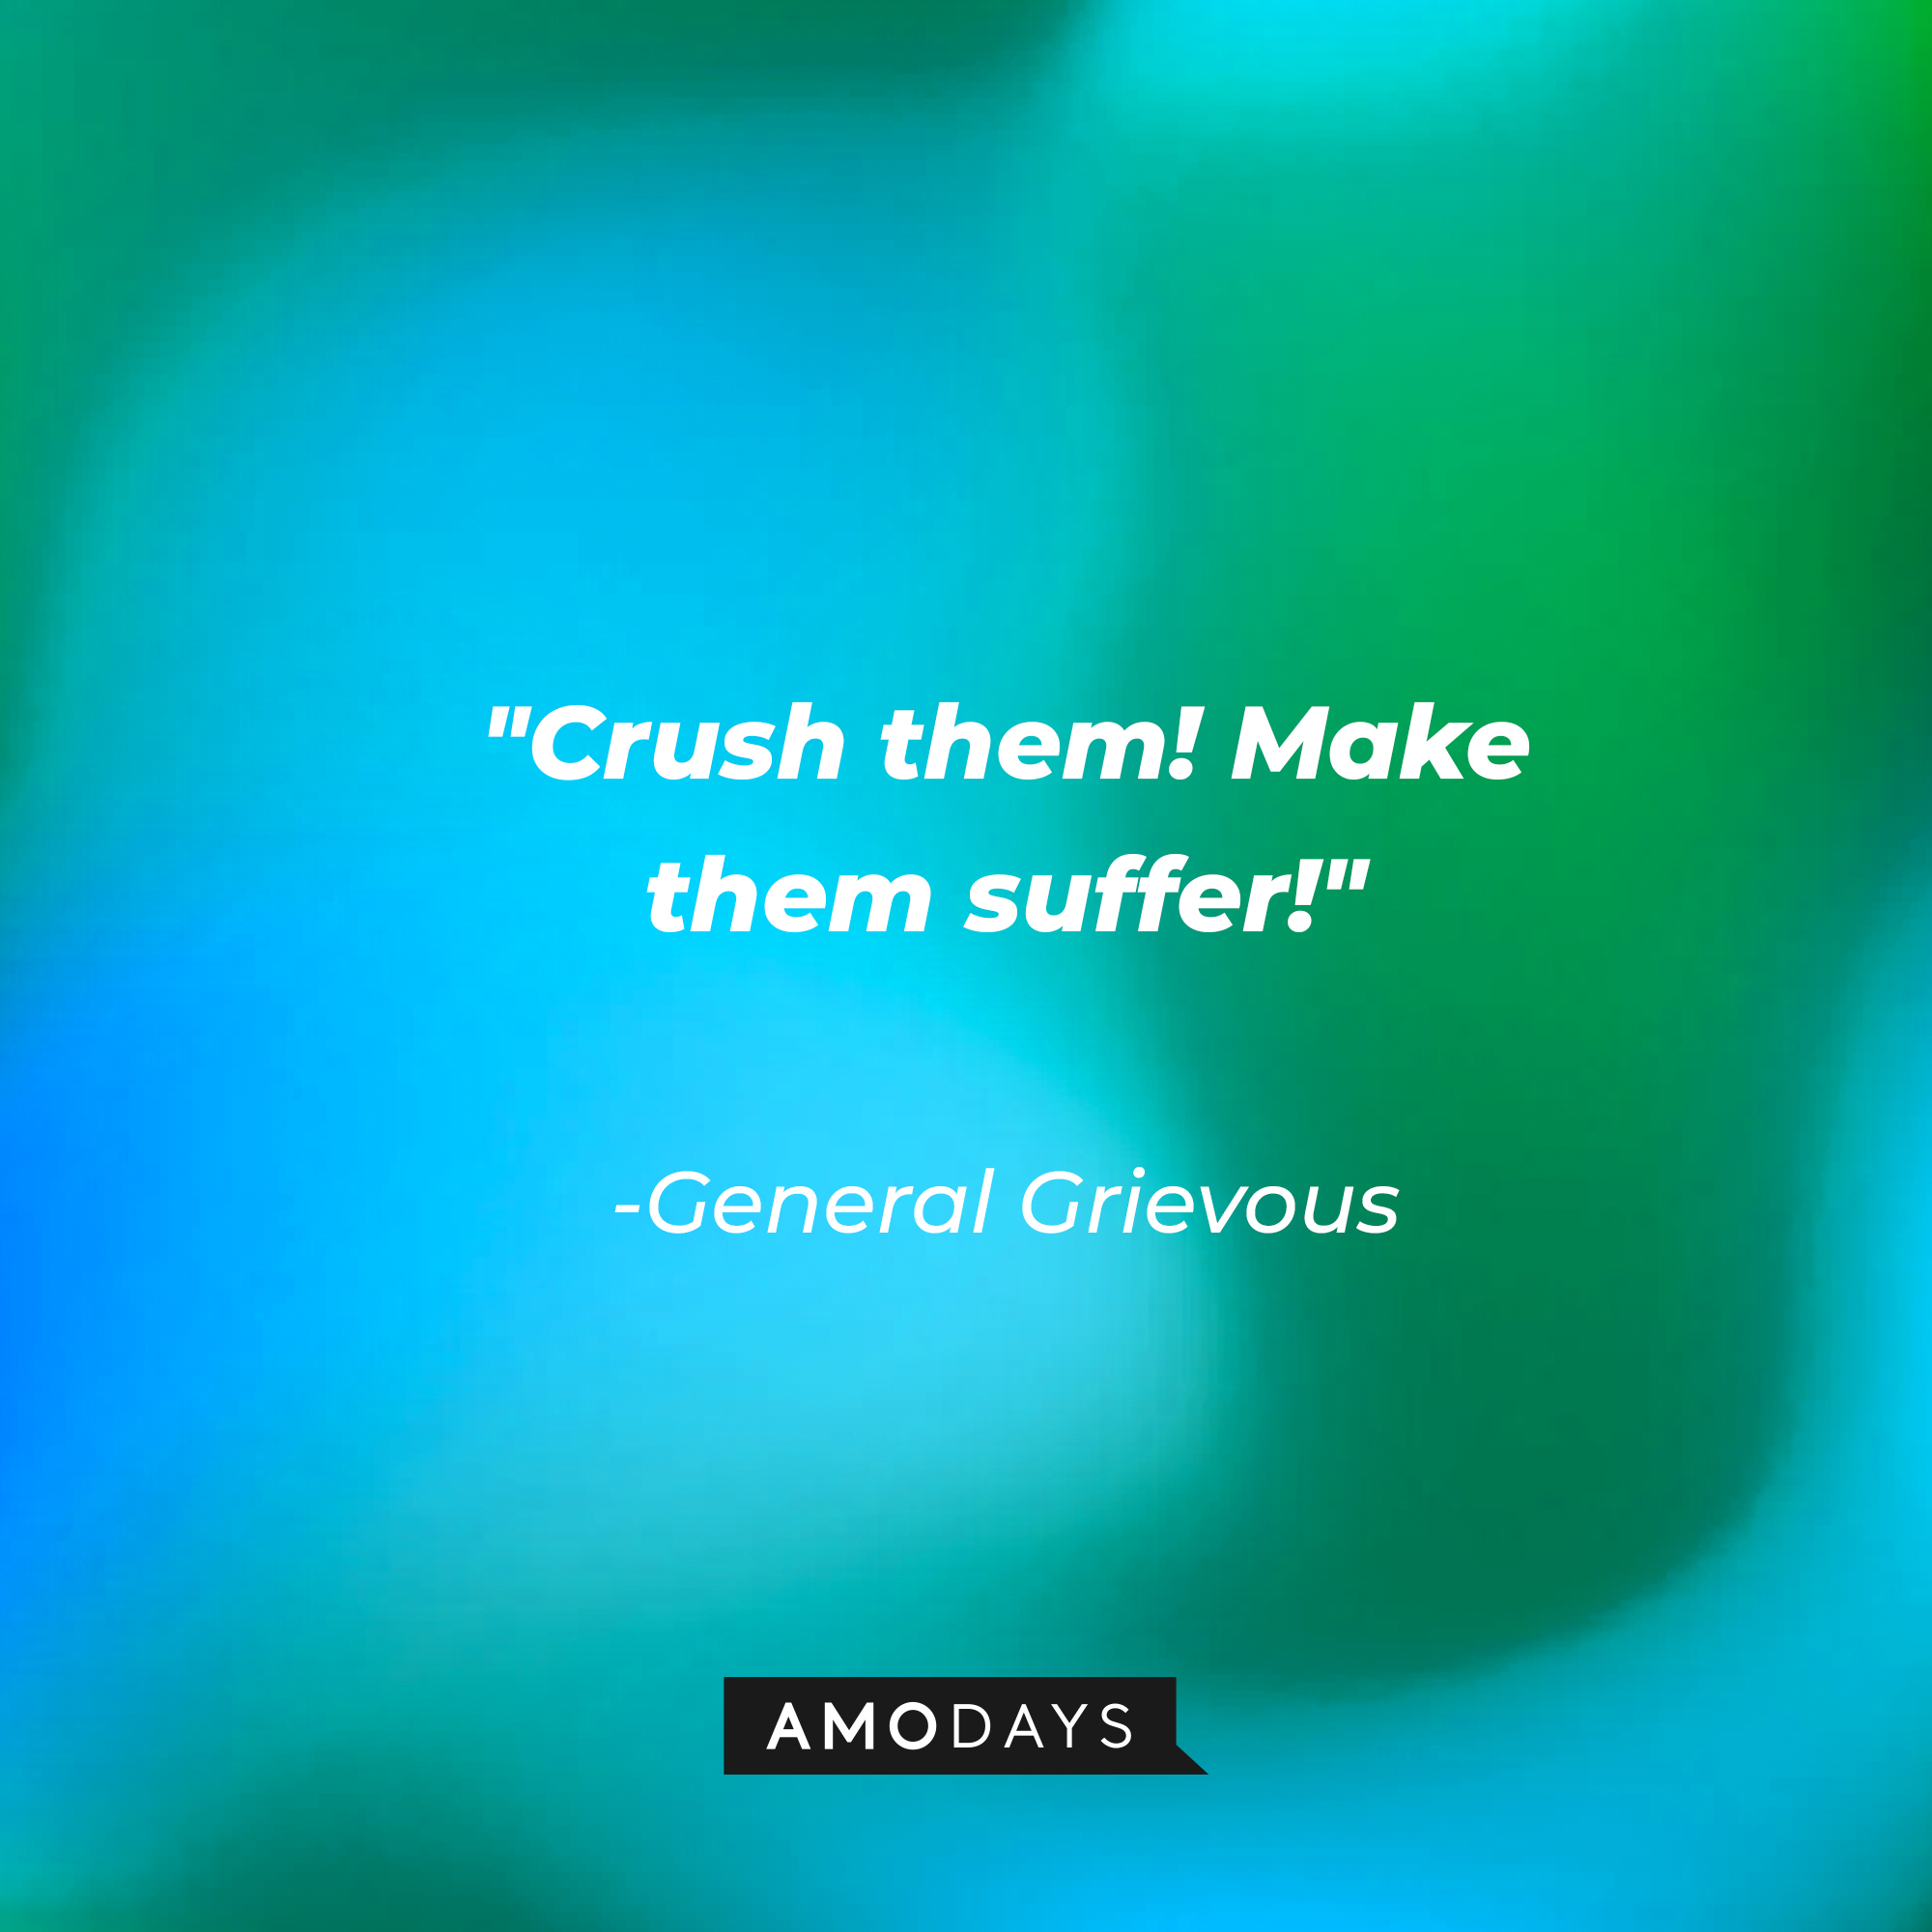 General Grievous' quote: "Crush them! Make them suffer!" | Source: AmoDays